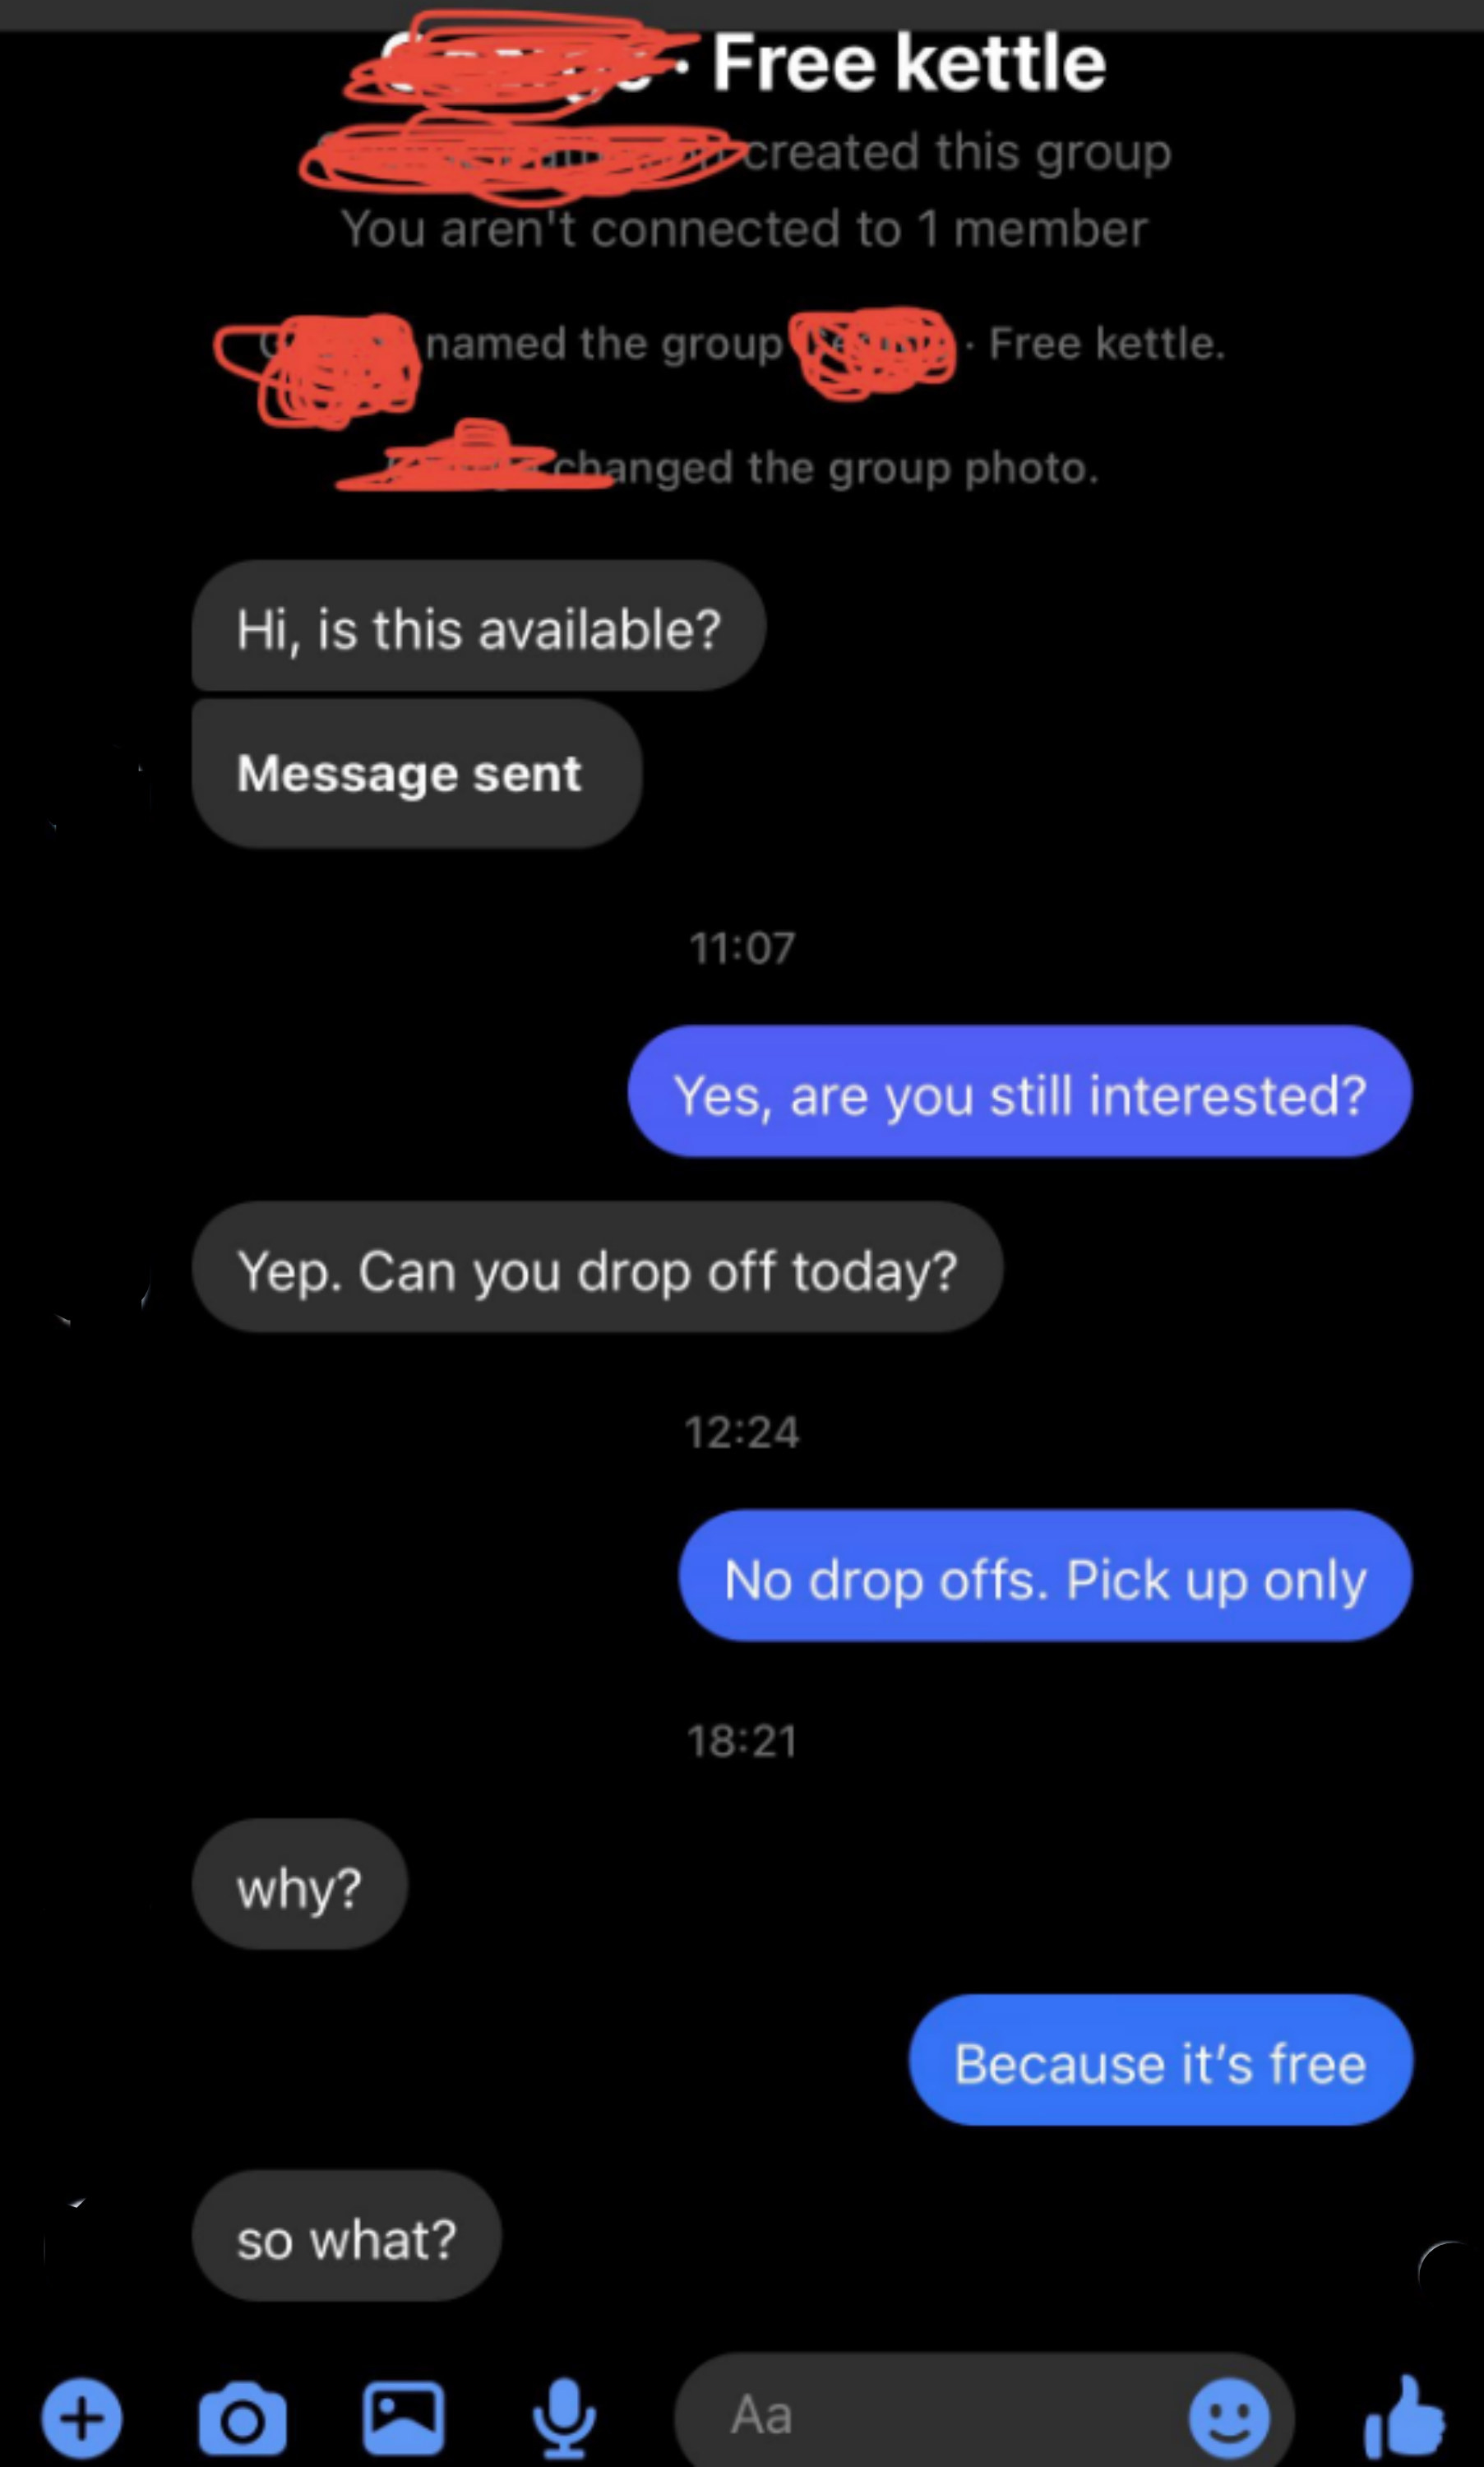 person asking if the seller can do a drop off and then asking why not